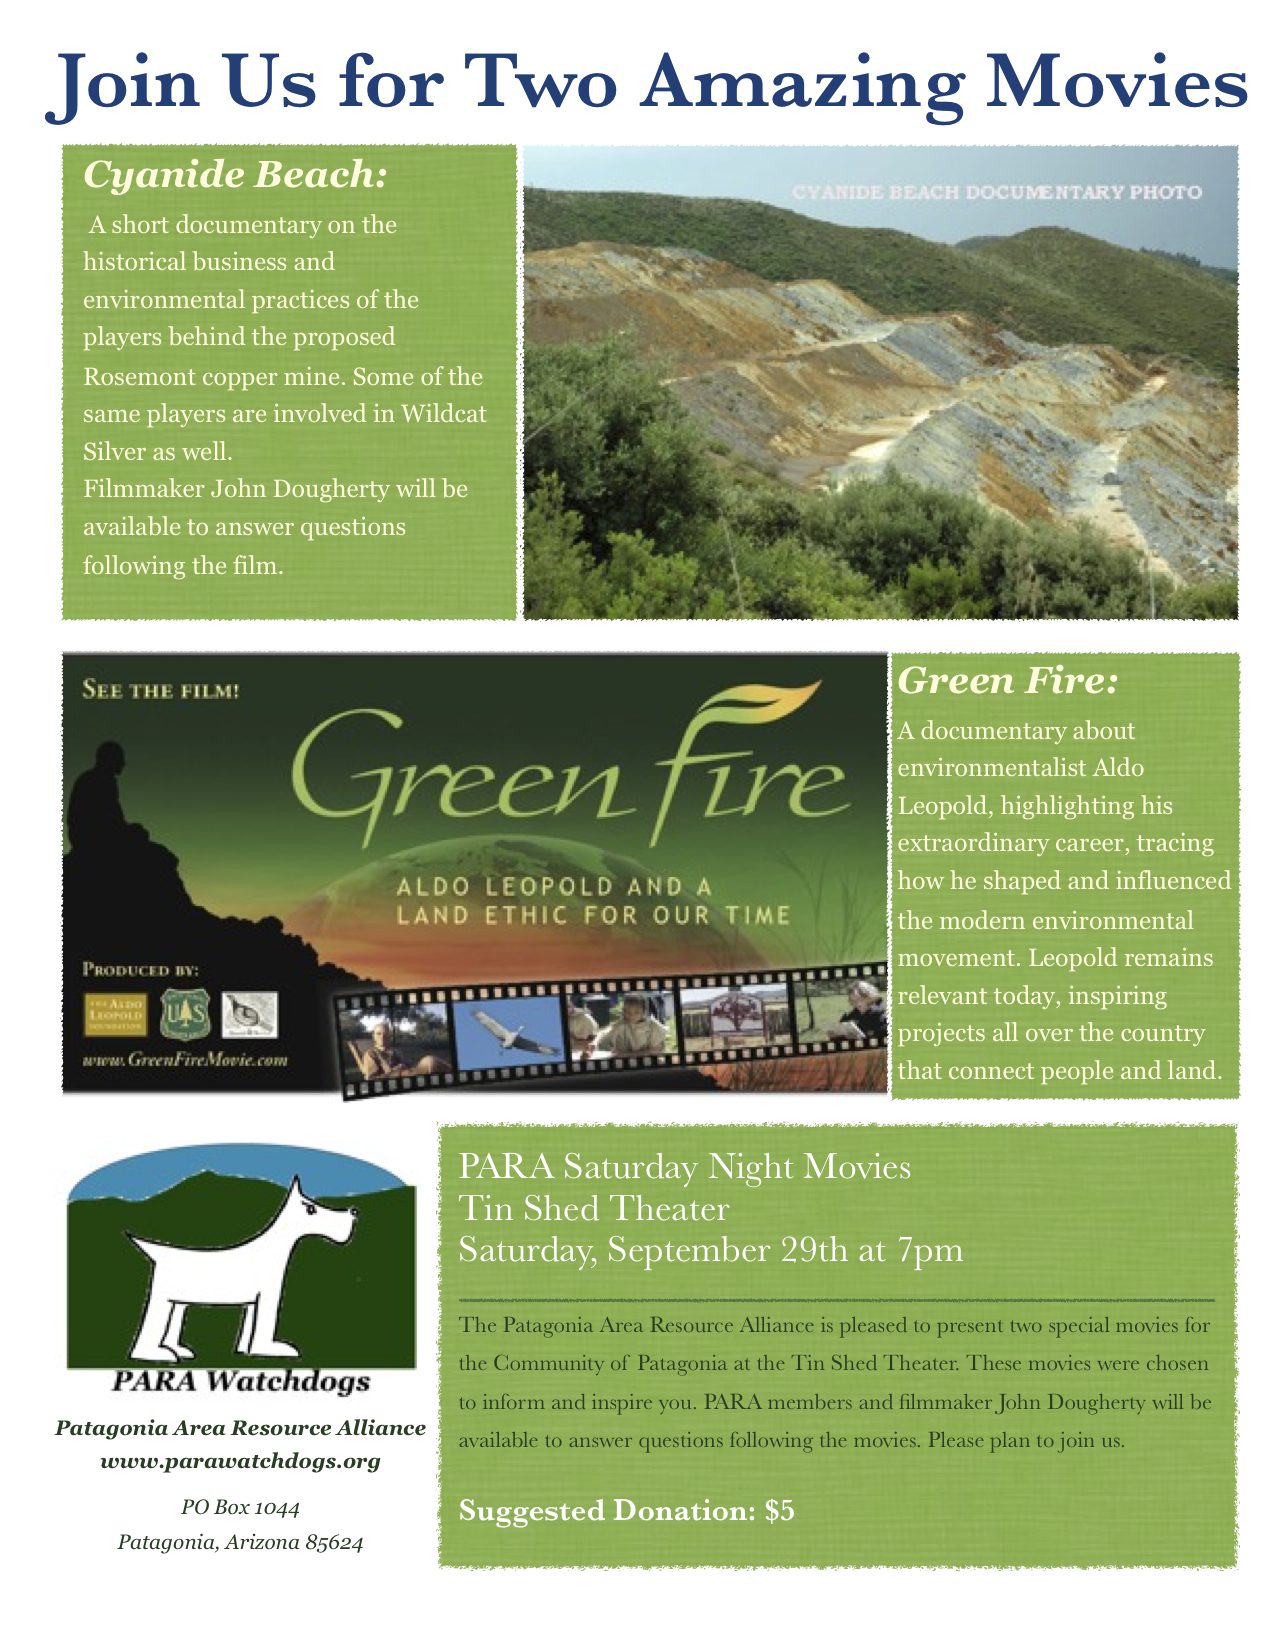 ... Green Fire" at the Tin Shed Theater | Patagonia Area Resource Alliance